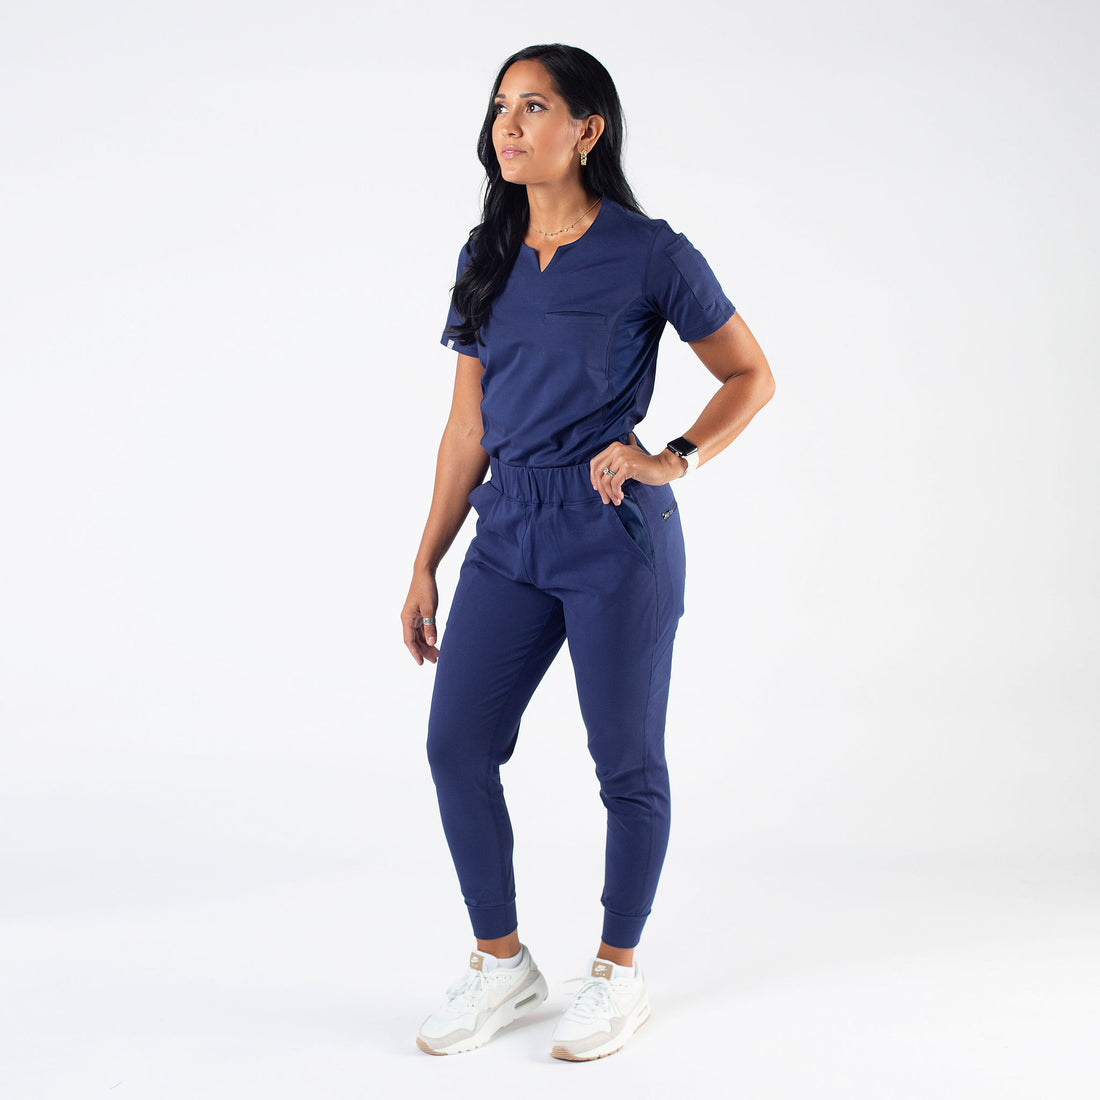 BlueSkyScrubs Presents the Latest Medical Scrubs for Women to